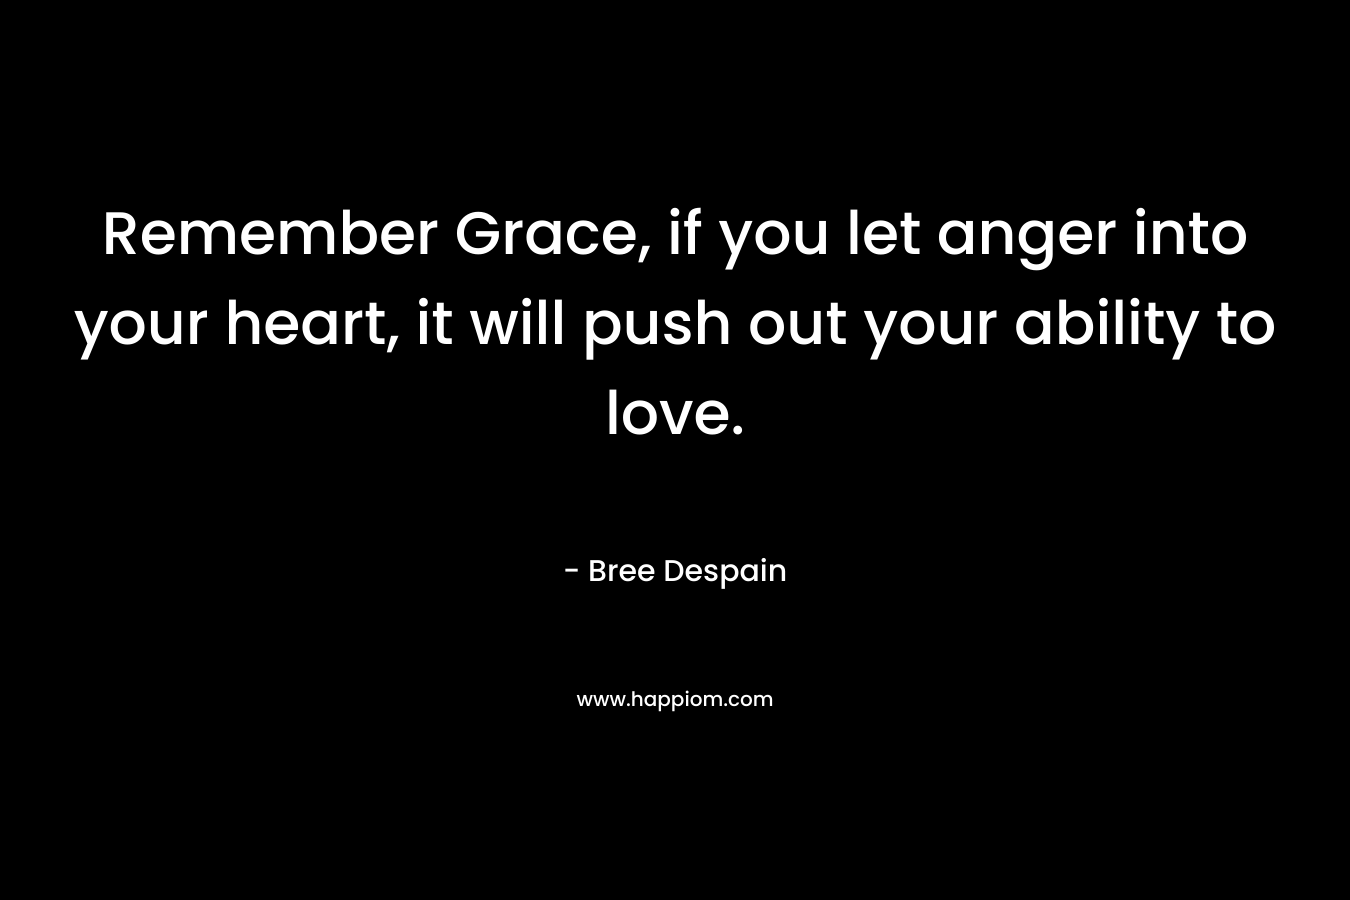 Remember Grace, if you let anger into your heart, it will push out your ability to love. – Bree Despain